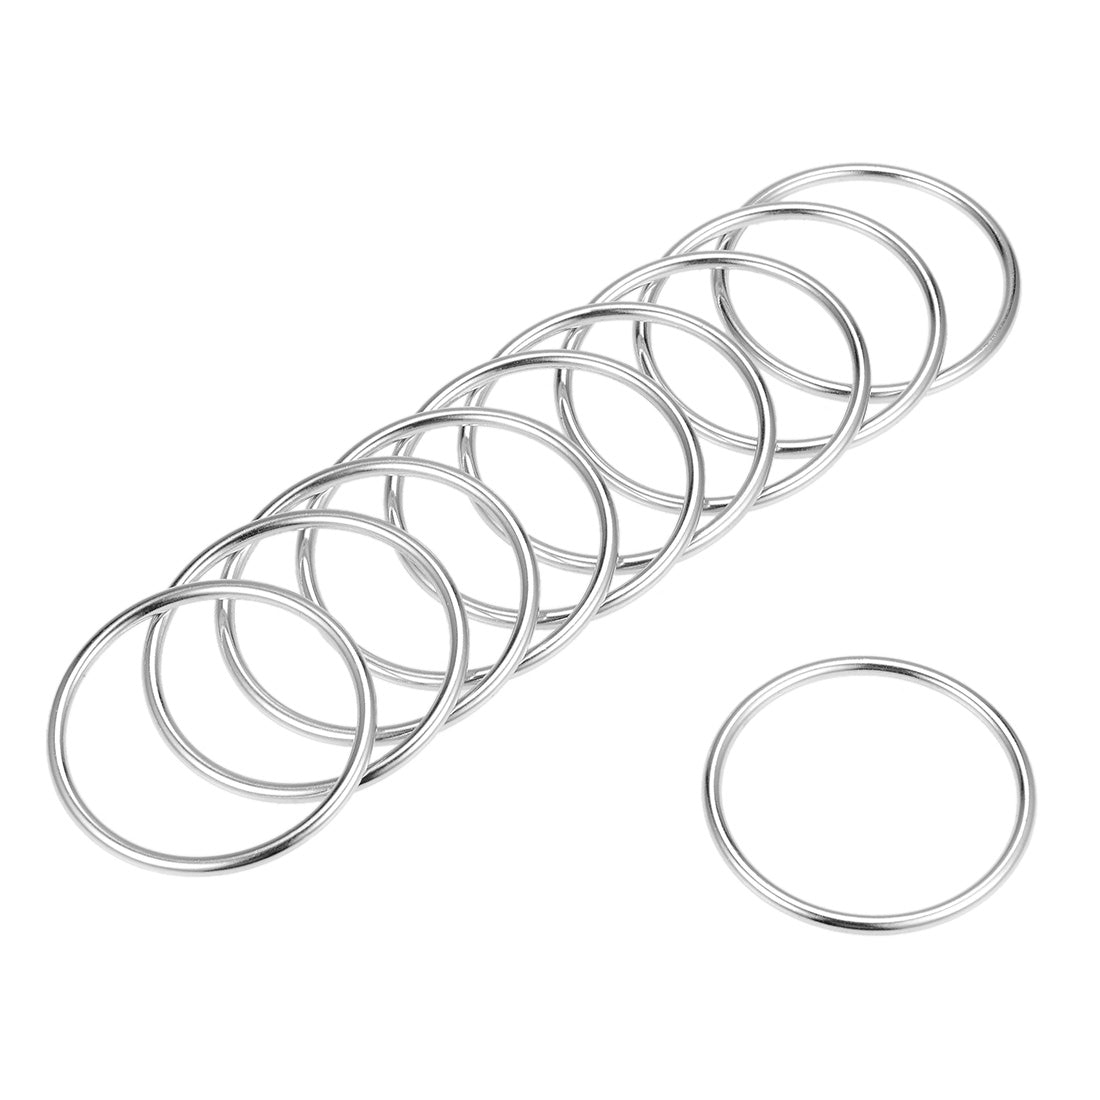 uxcell Uxcell O Ring Buckle 45mm(1.8") ID 3mm Thickness Zinc Alloy O-Rings for Hardware Bags Belts Craft DIY Accessories, Silver Tone 10pcs